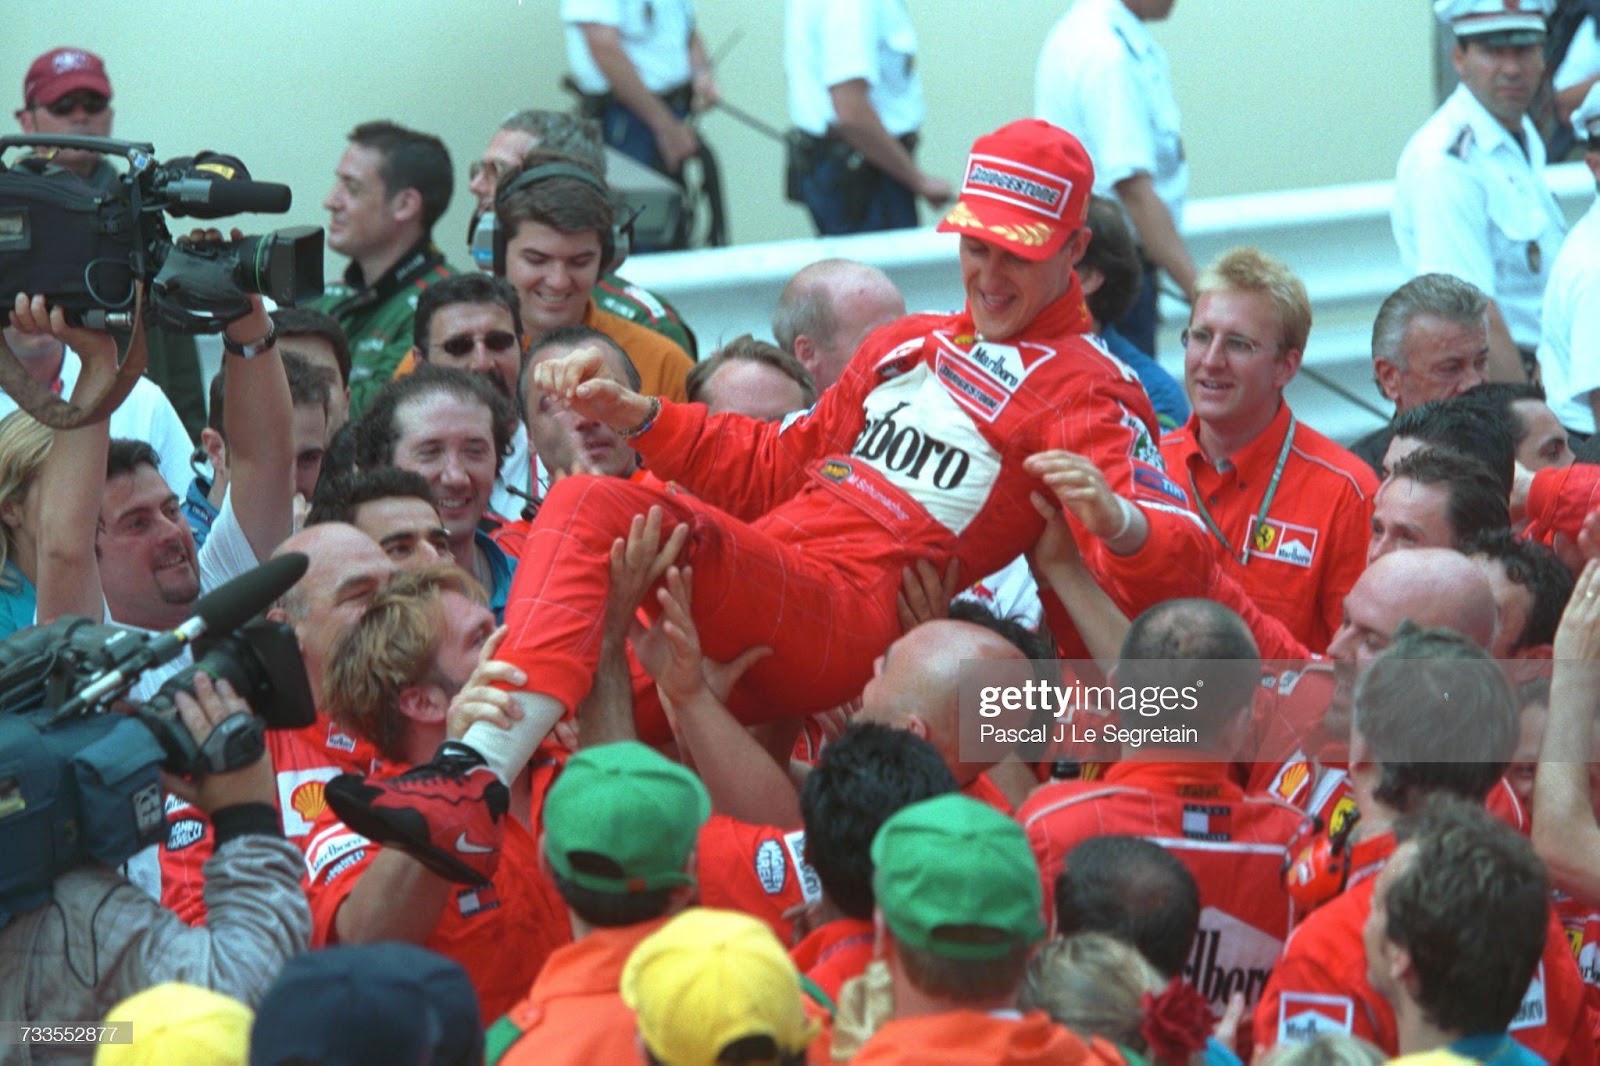 Michael Schumacher celebrating his victory at the Monaco F1 Grand Prix held on May 27, 2001 in Monte Carlo.